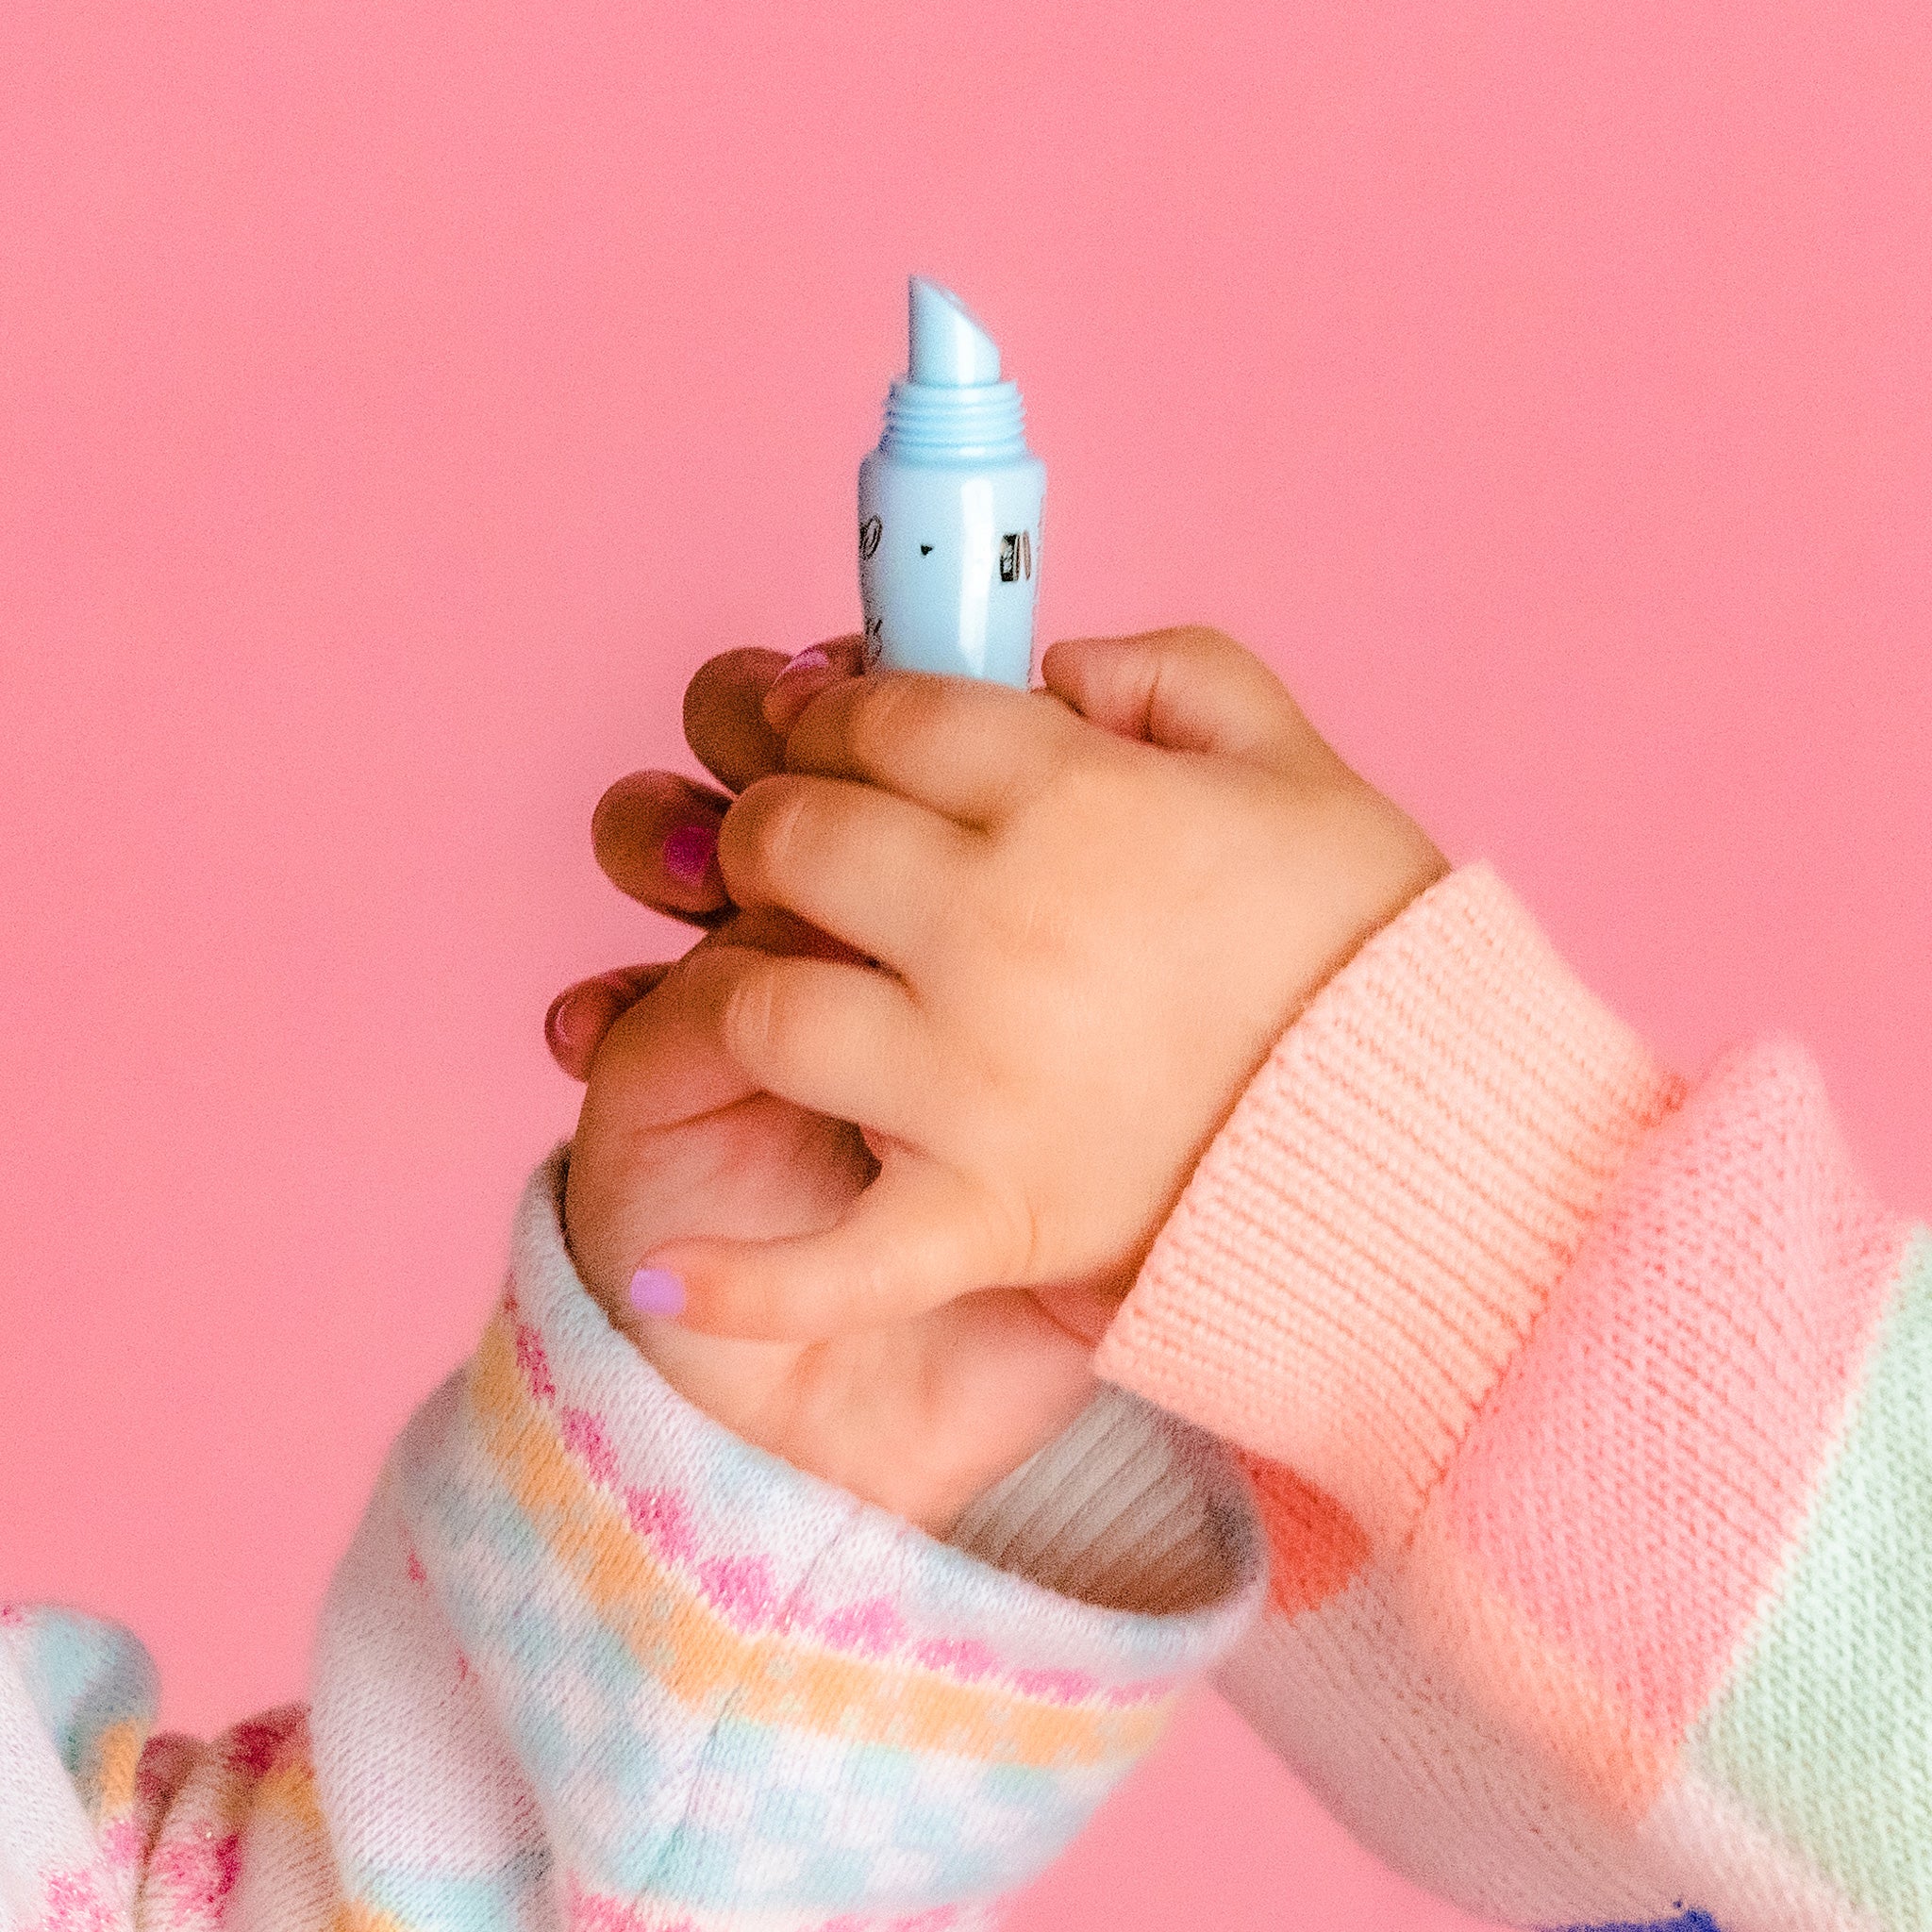 Oh-Flossy-Kids-Natural-Makeup-Lip-gloss-cotton-candy-in-girls-hands